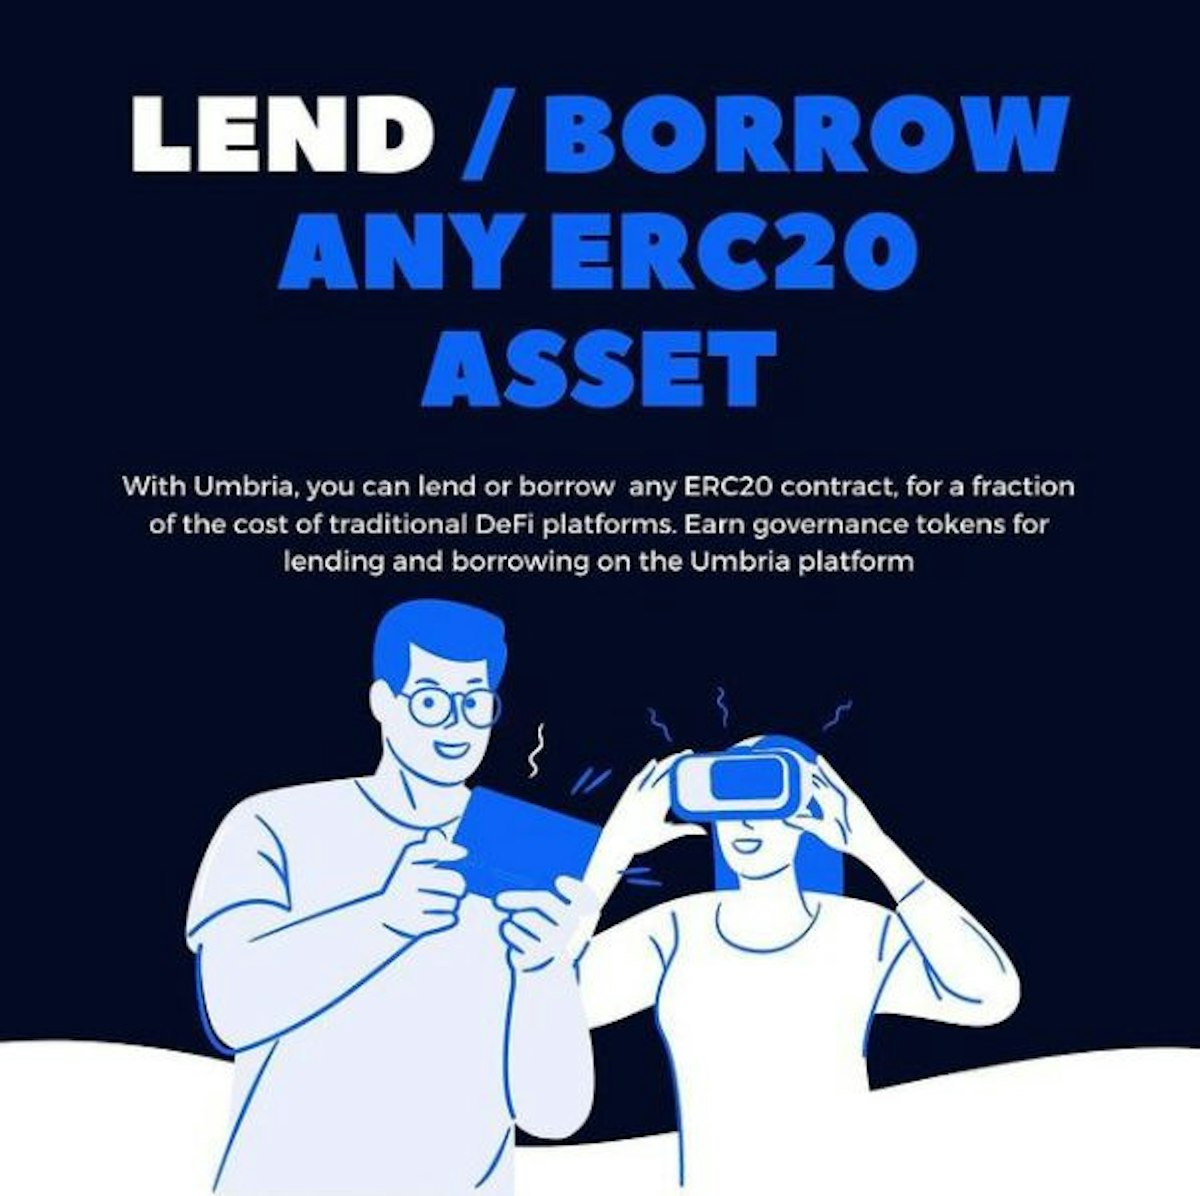 featured image - We're Making Lending and Borrowing of Any ERC20 Asset Easier